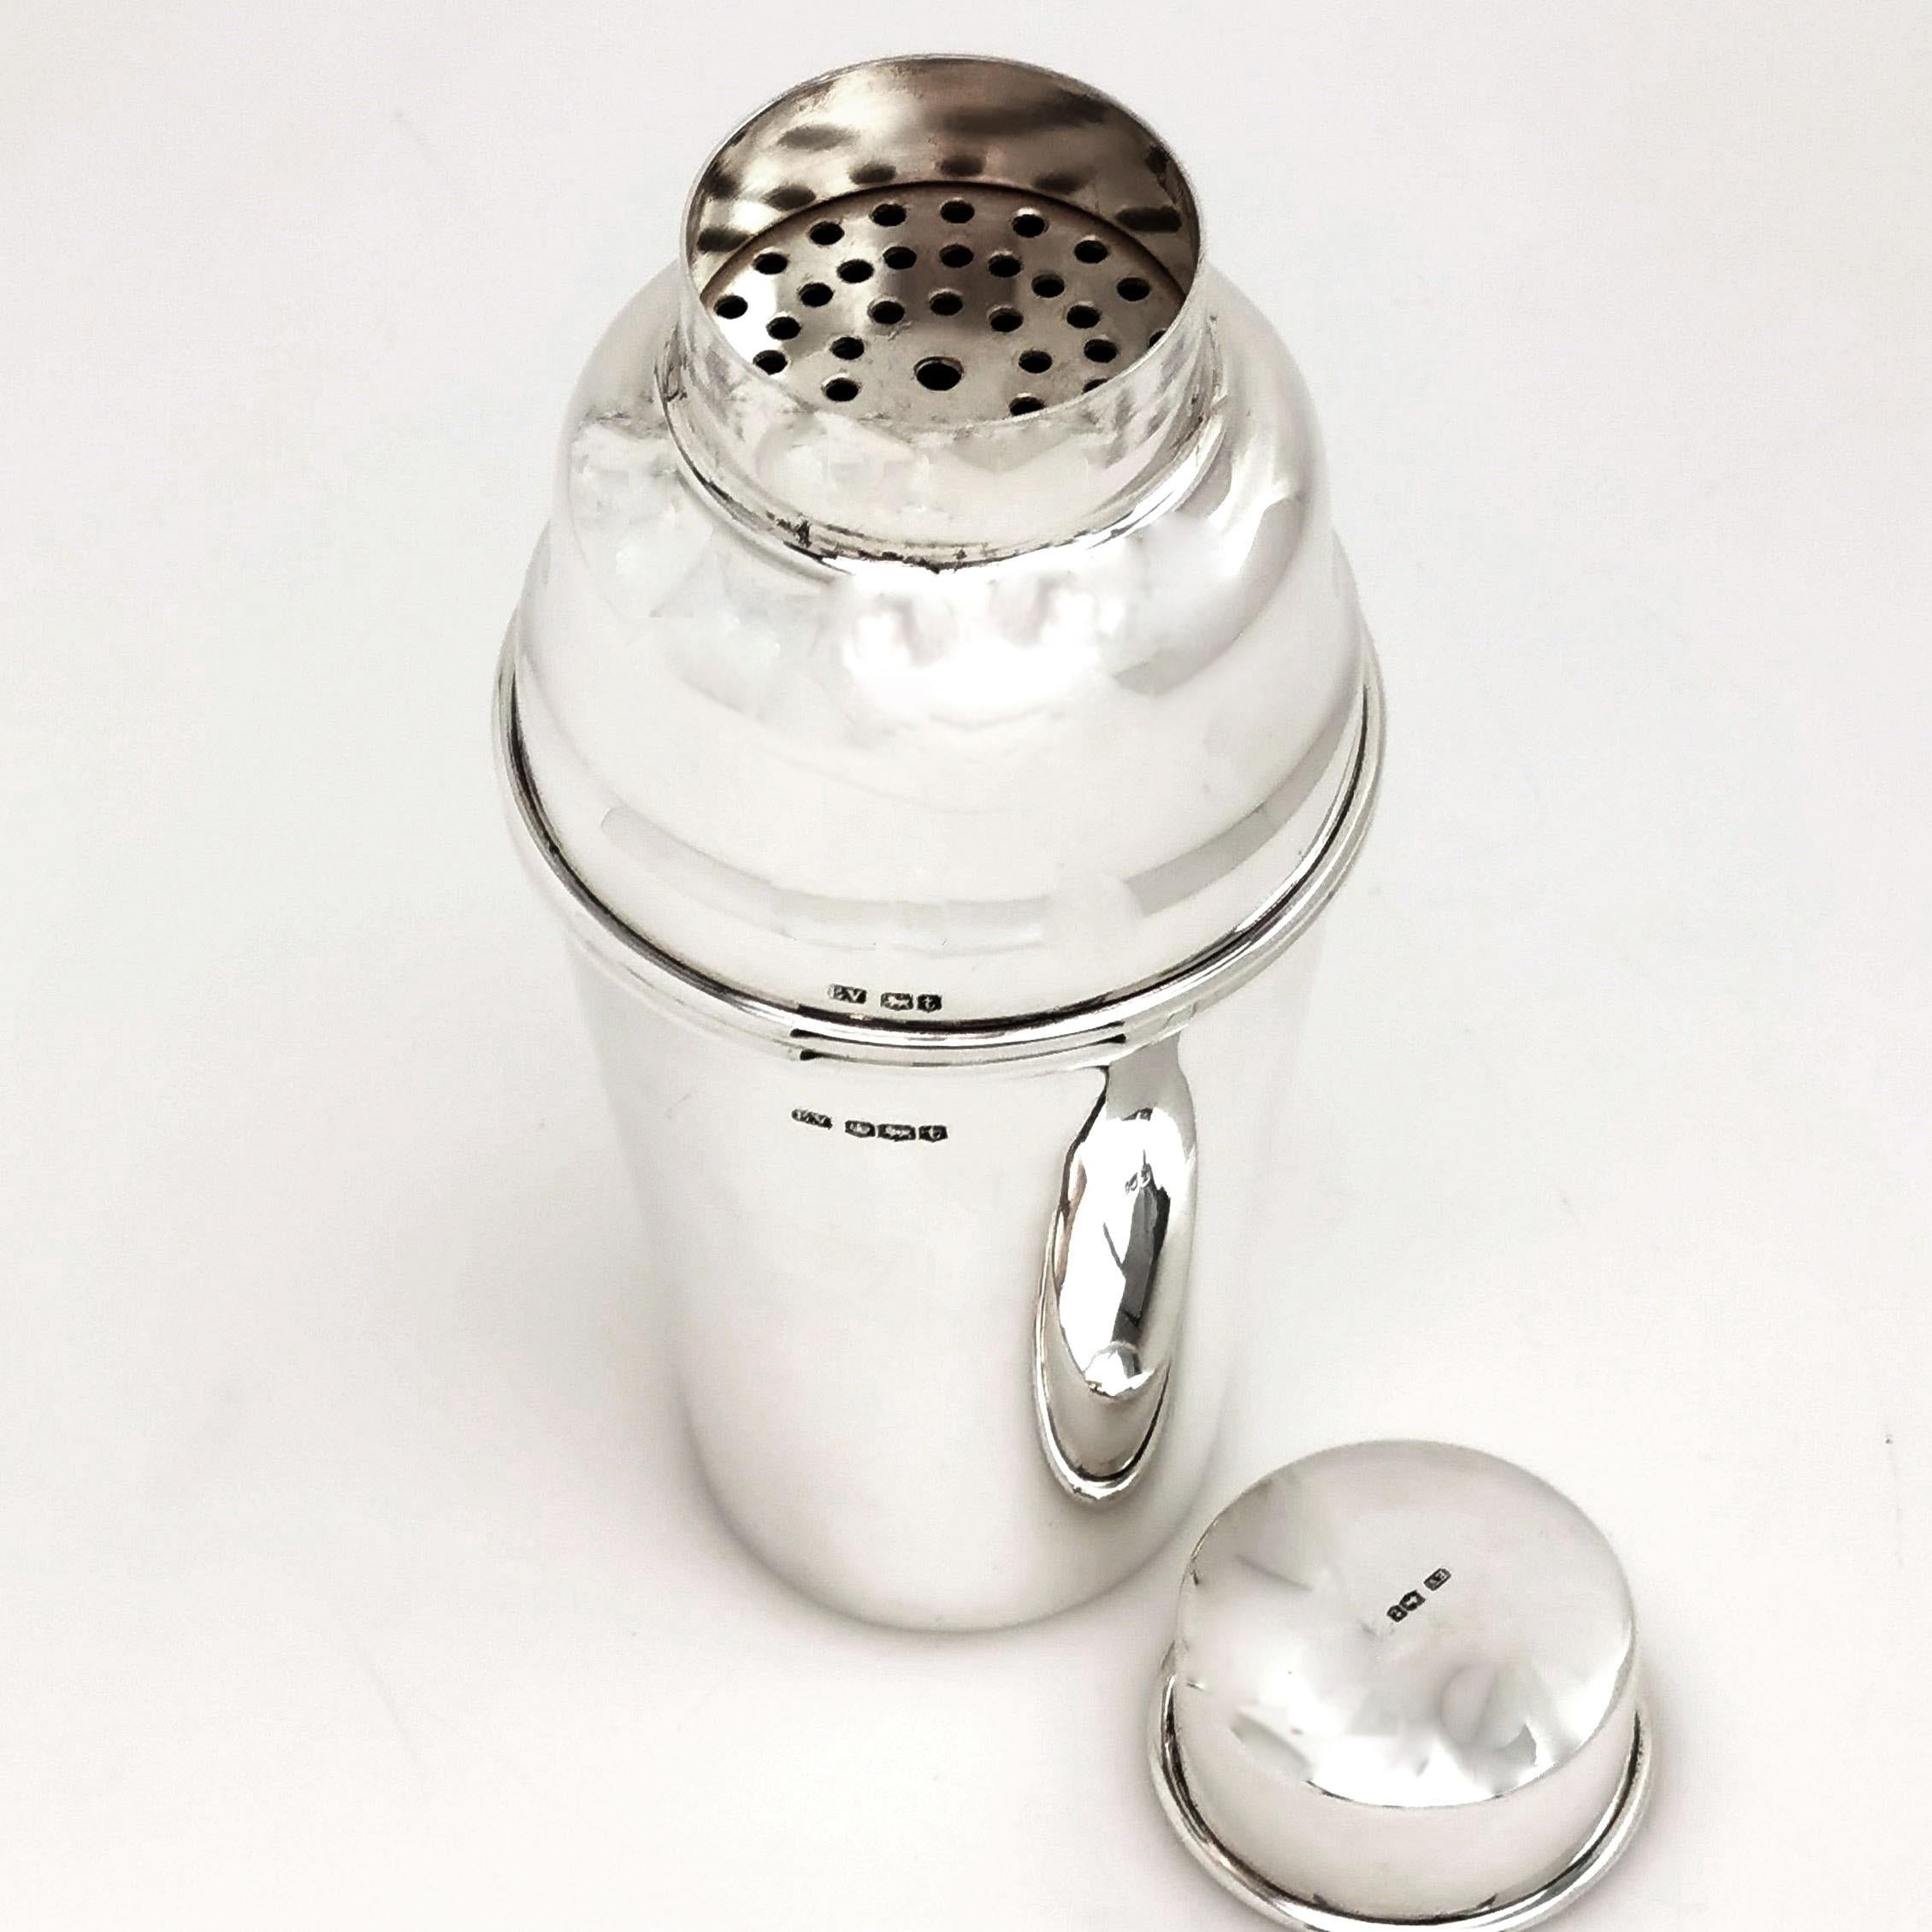 A Classic sterling Silver Cocktail Shaker in an elegant Art Deco design. The Cocktail Shaker has a bust fit strainer and a push fit lid. It is made from plain polished silver.

Made in Sheffield in 1936 by Emile Viner.

Approx. Weight - 426g /